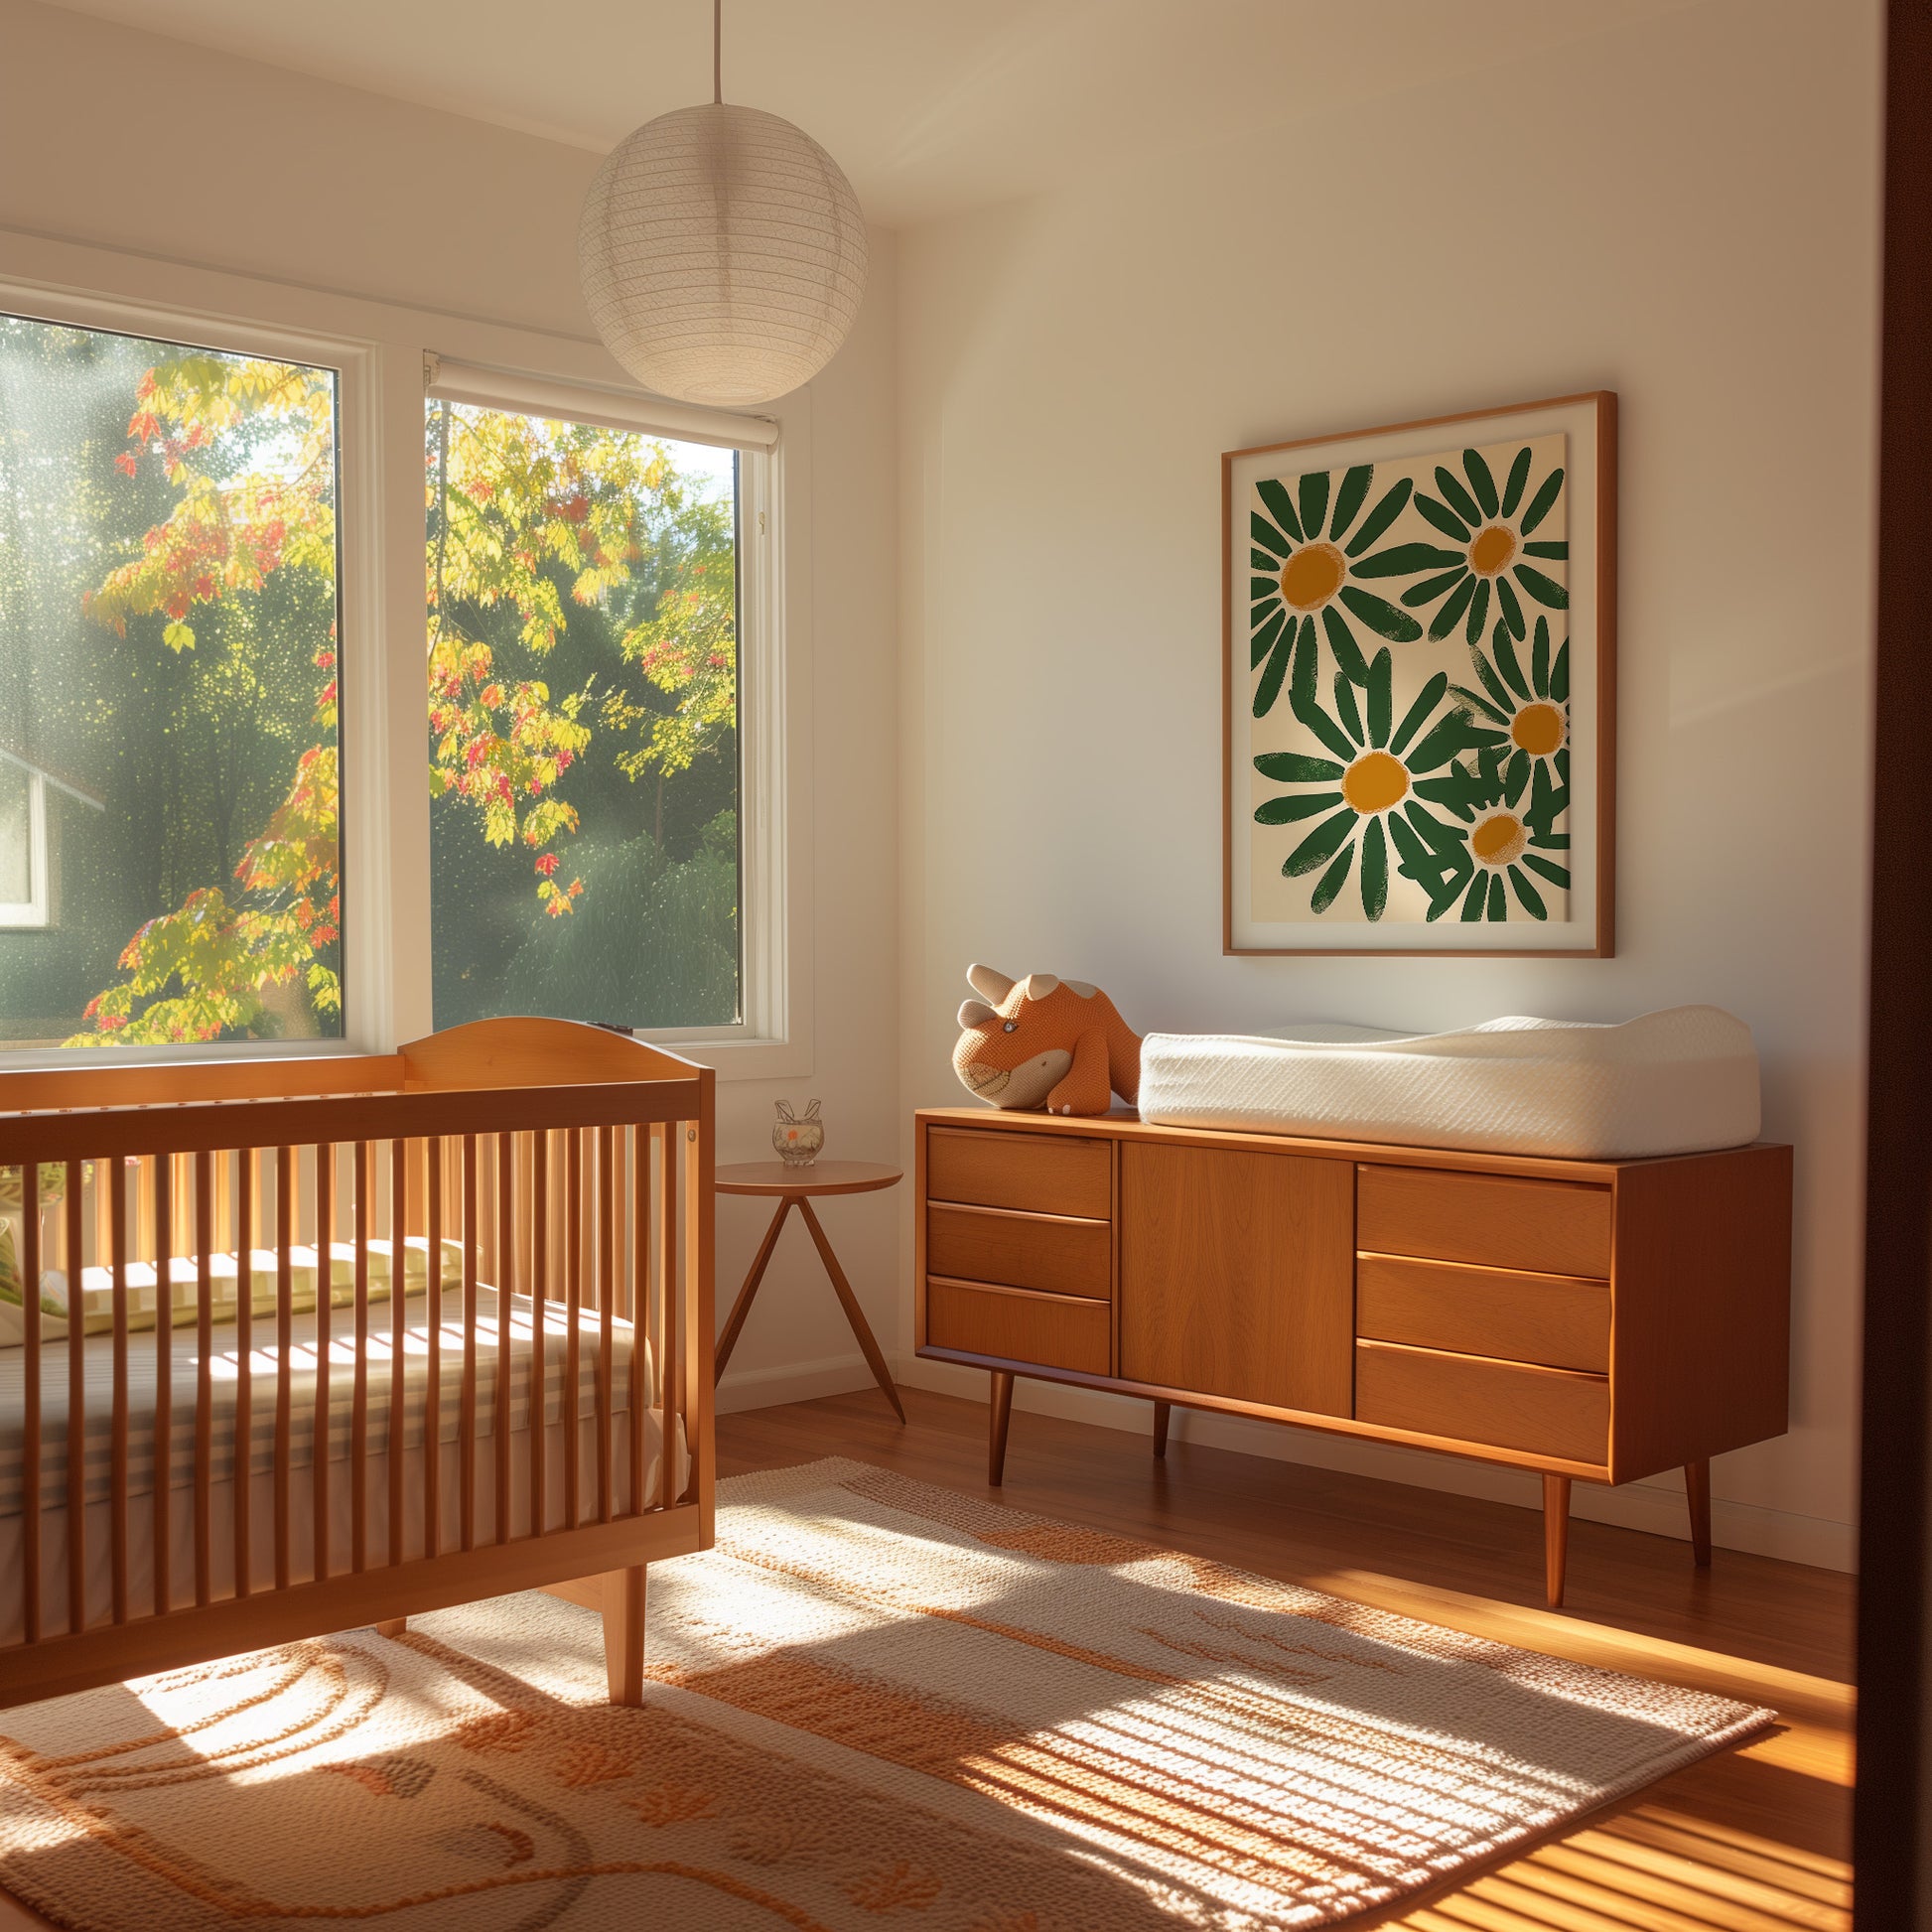 A cozy sunlit bedroom with a wooden crib, dresser, and colorful autumn trees outside the window.